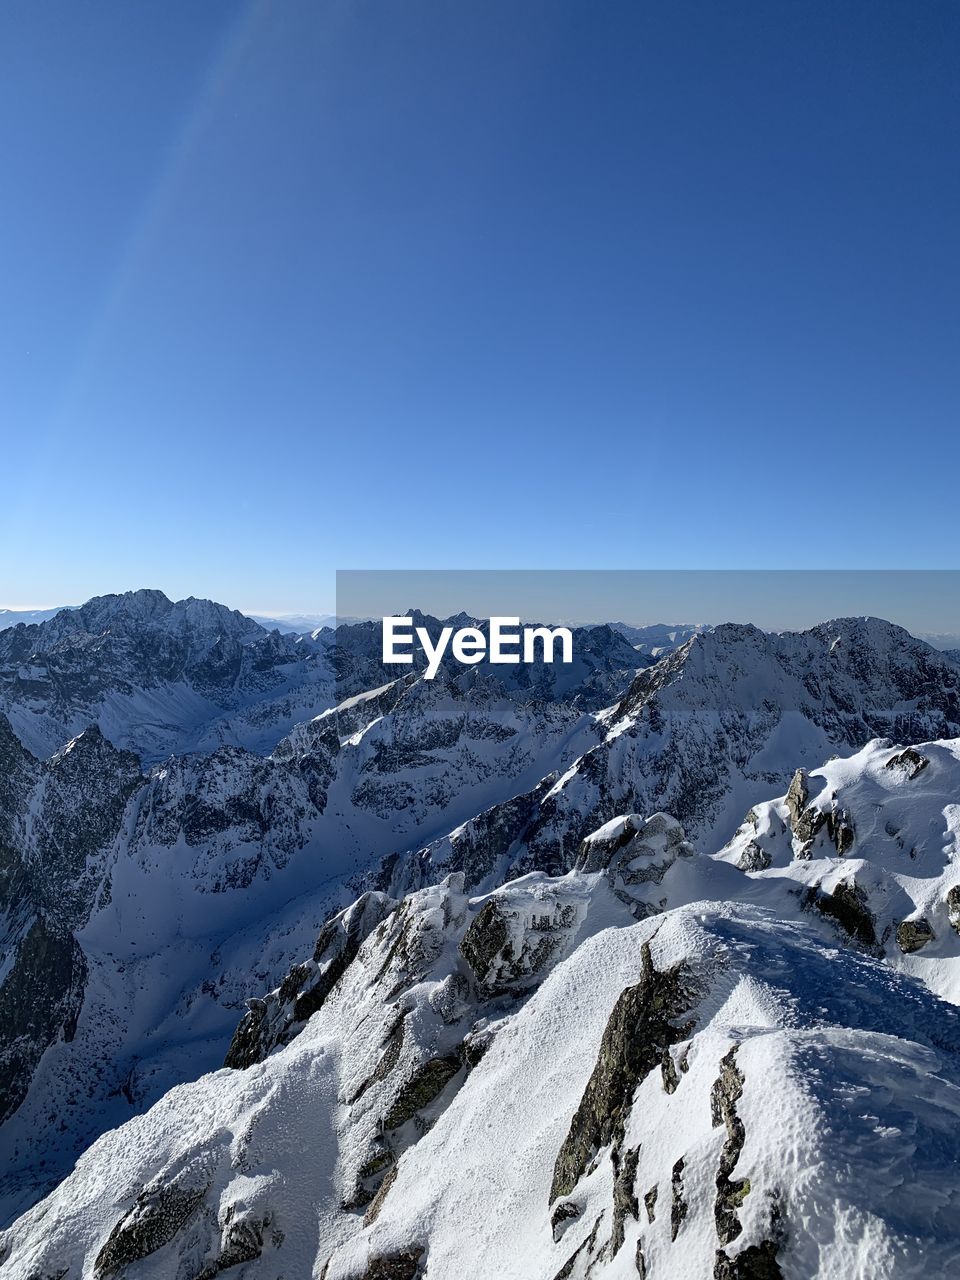 mountain, snow, cold temperature, mountain range, winter, blue, sky, nature, scenics - nature, beauty in nature, environment, mountaineering, no people, day, clear sky, landscape, outdoors, rock, ridge, summit, ice, tranquility, frozen, sunlight, snowcapped mountain, extreme terrain, tranquil scene, extreme sports, sports, mountain peak, non-urban scene, travel, adventure, low angle view, travel destinations, sunny